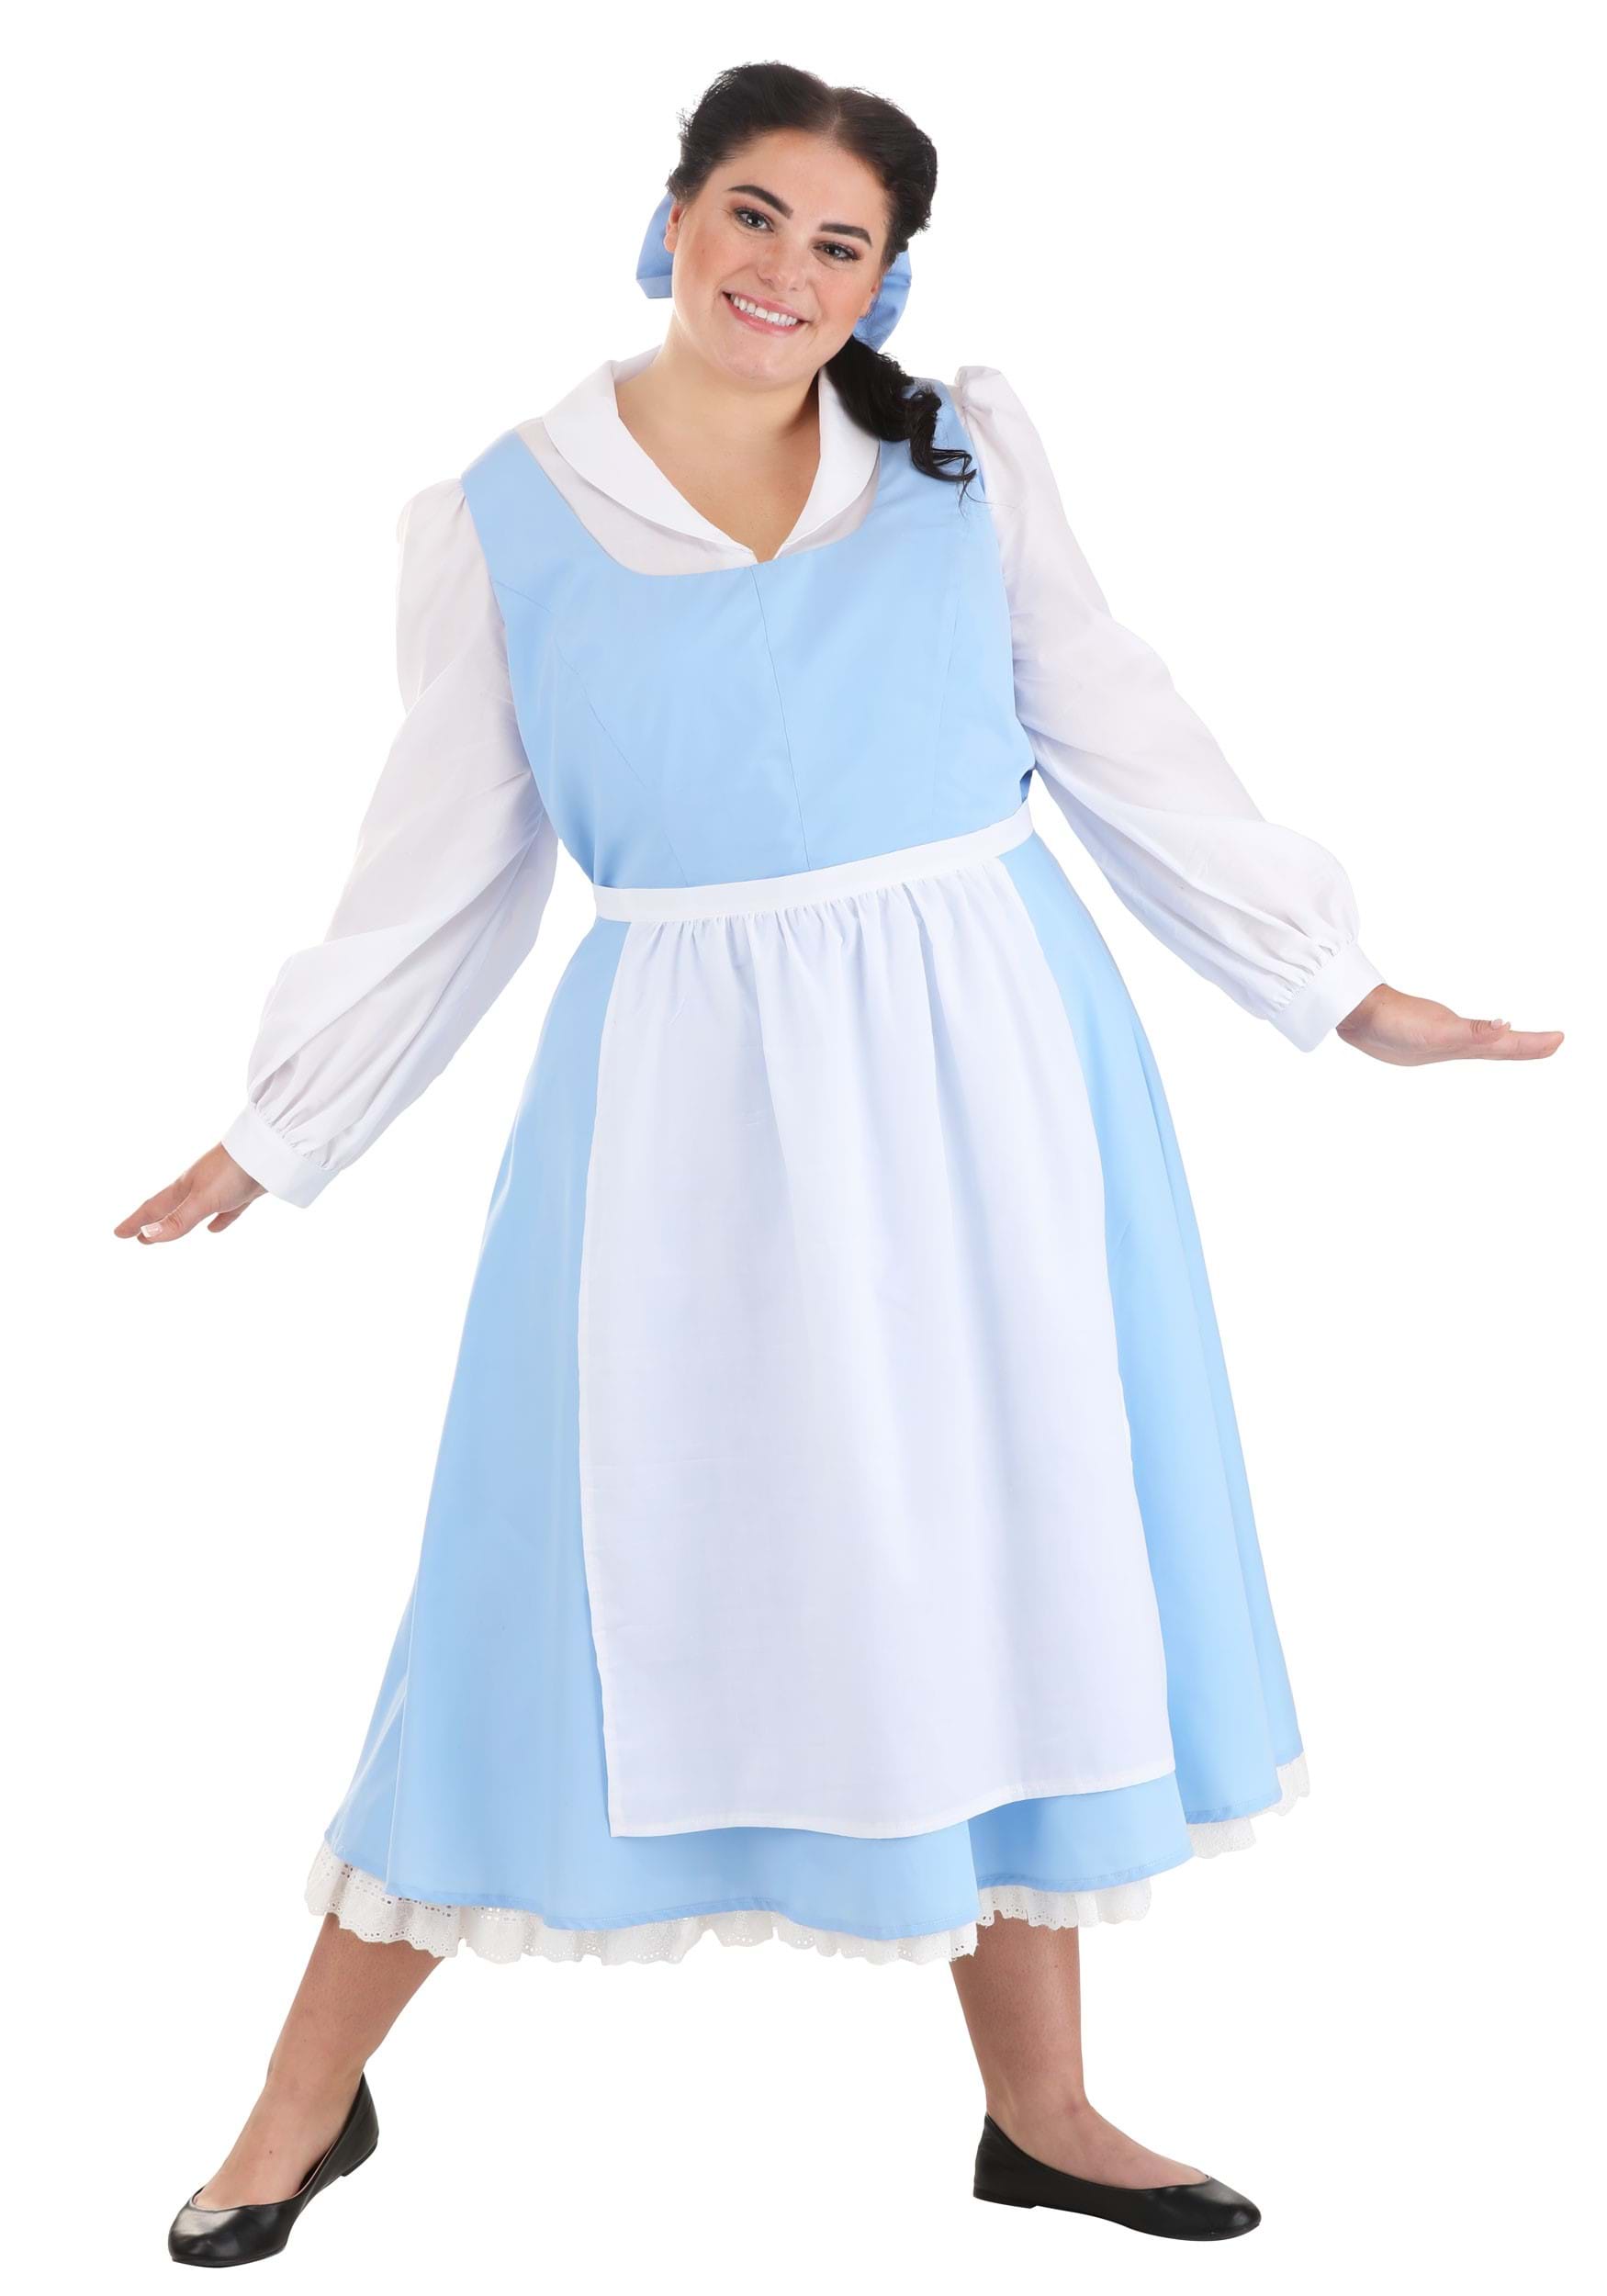 Image of FUN Costumes Beauty and the Beast Plus Size Belle Blue Costume Dress for Women